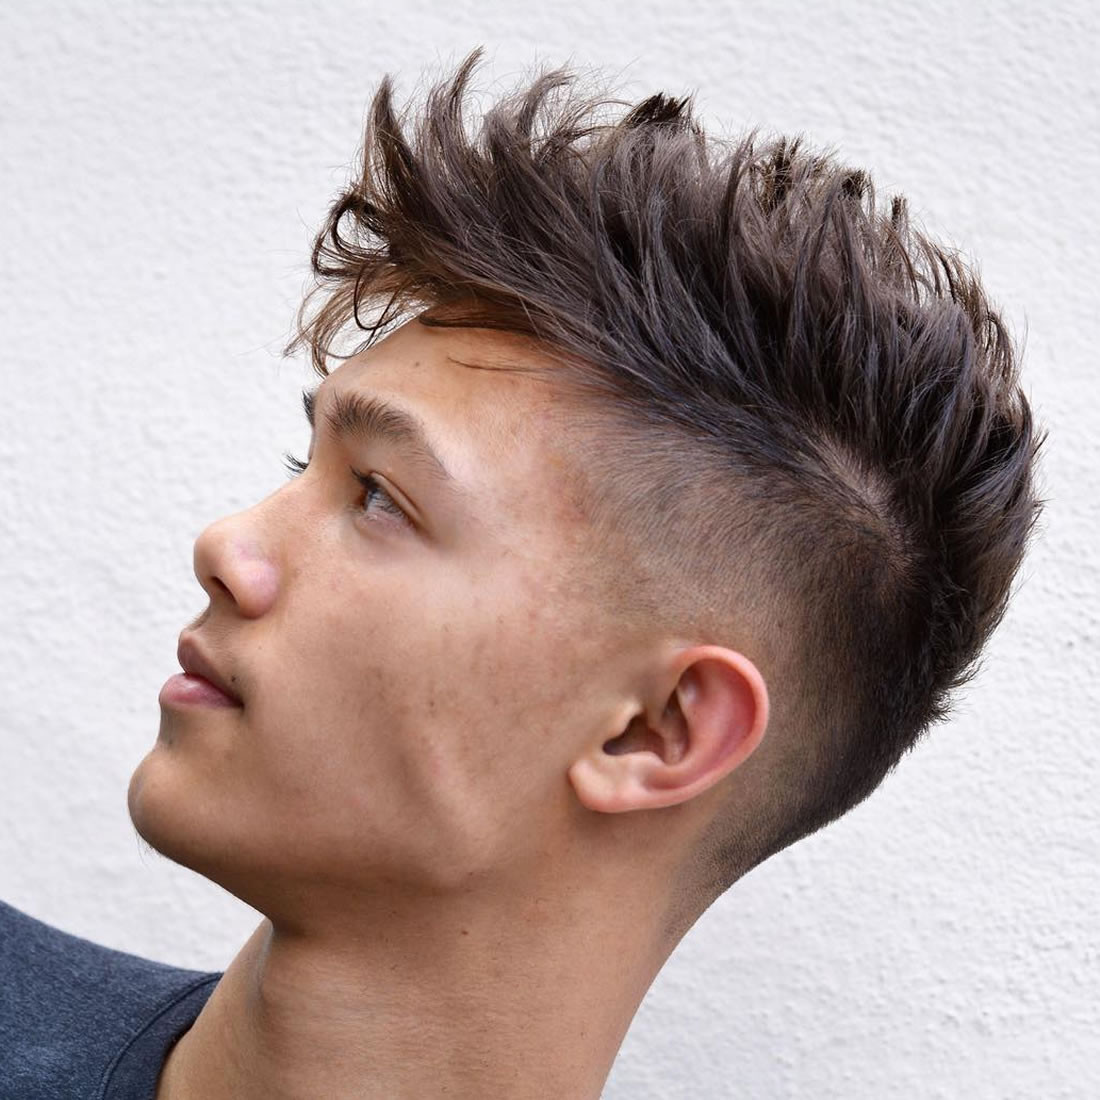 2019 Hairstyles Male
 Men’s Hairstyles 2018 – 2019